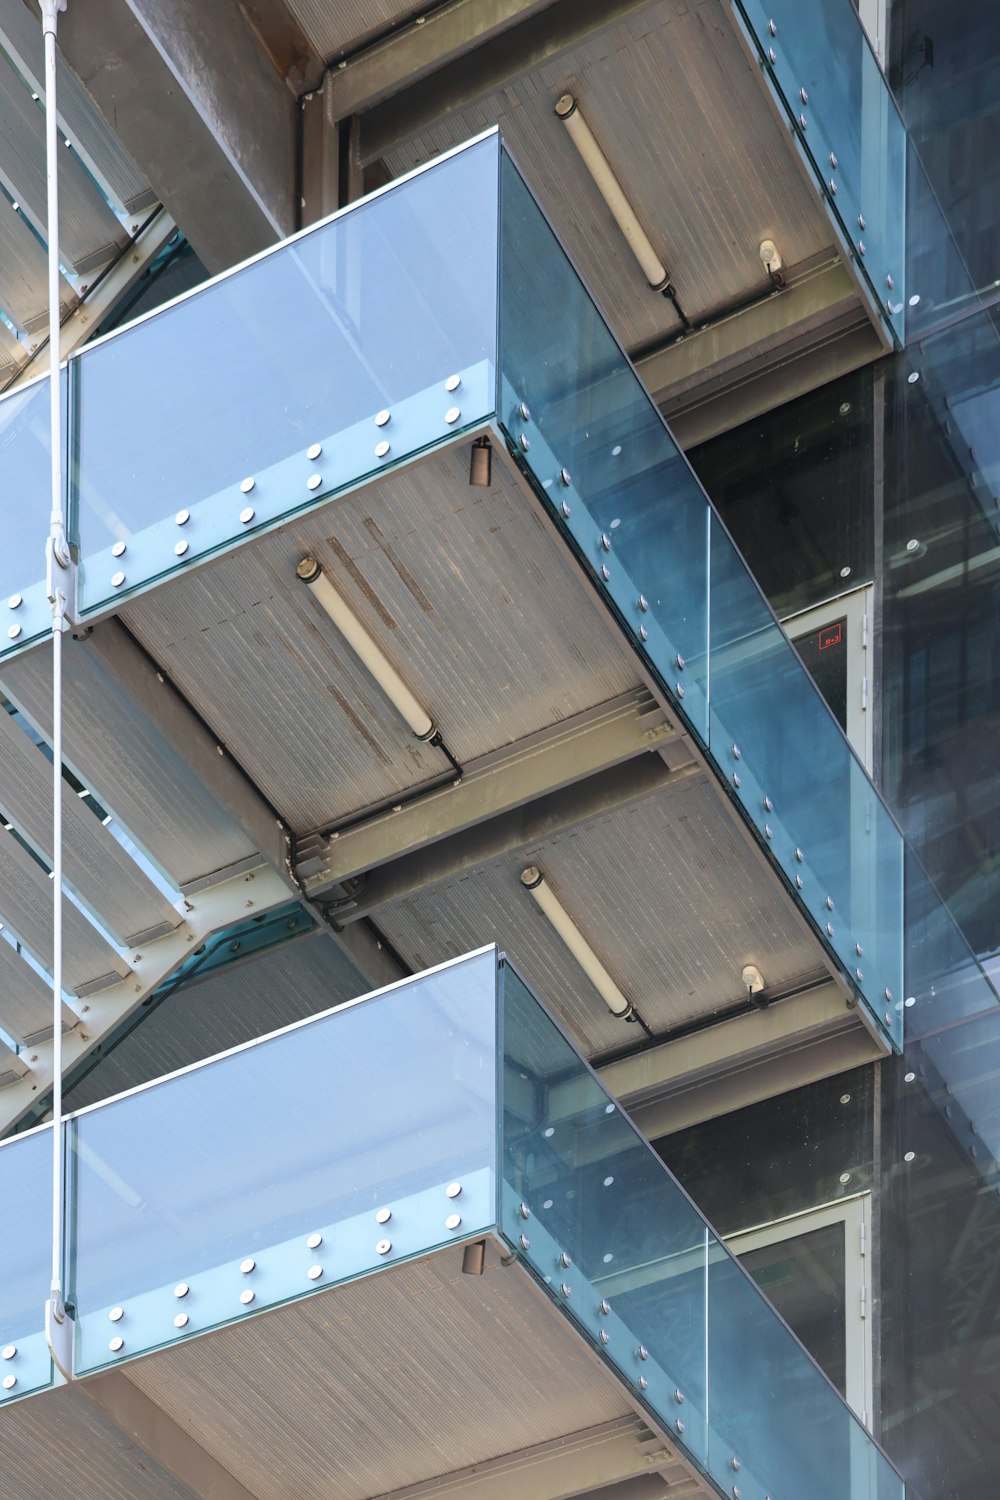 a close up of a building with glass balconies